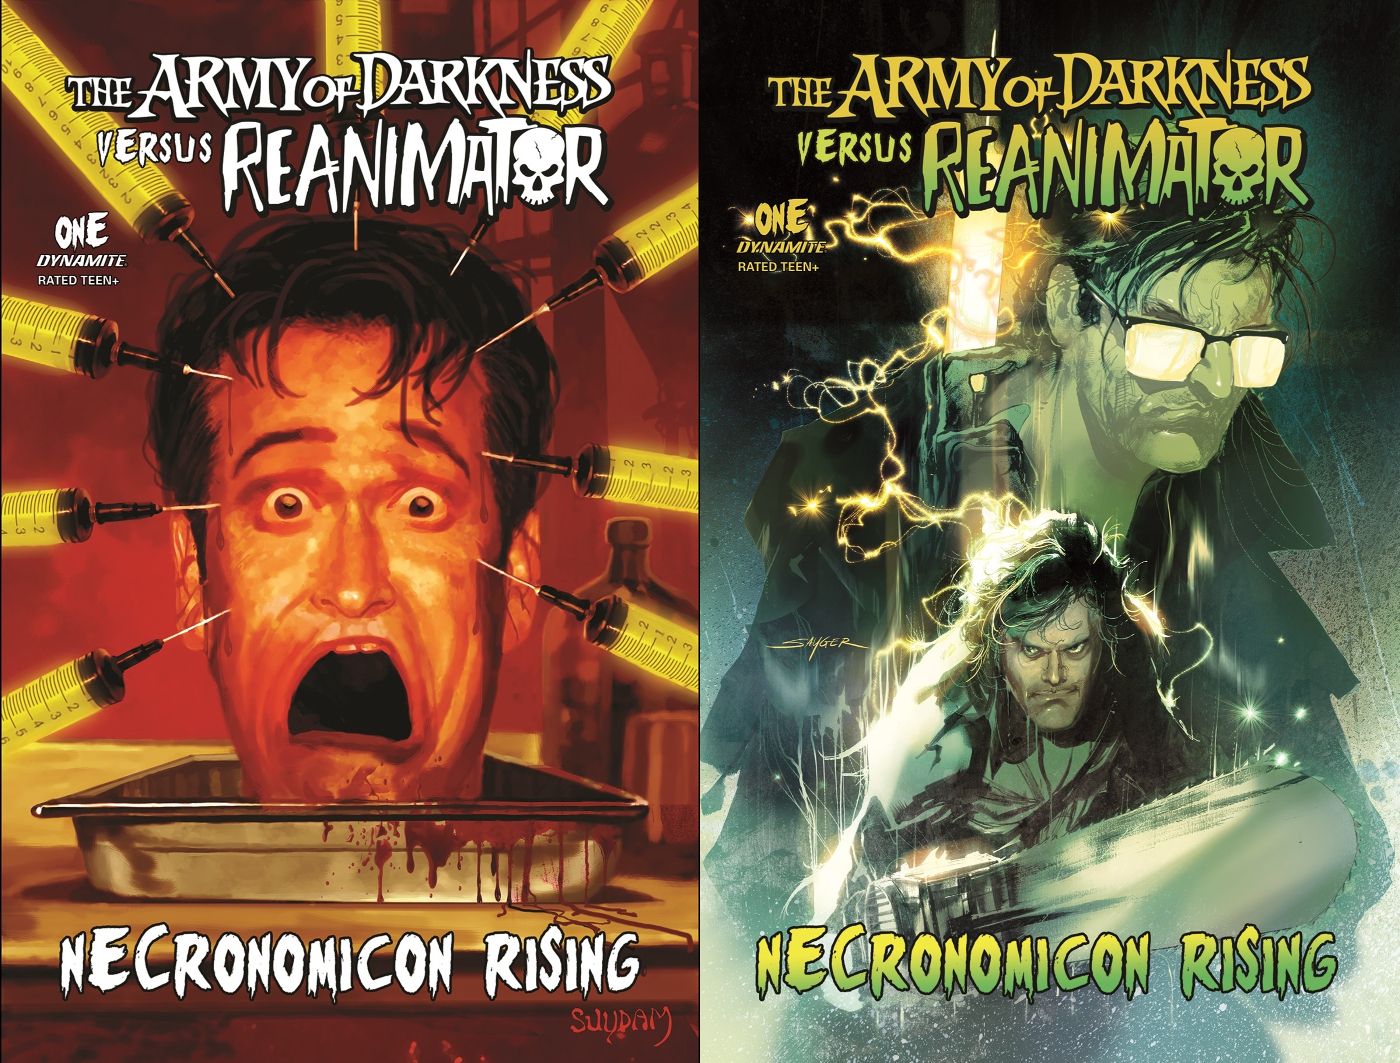 Covers 3 and 4 for Army of Darkness vs. Re-Animator